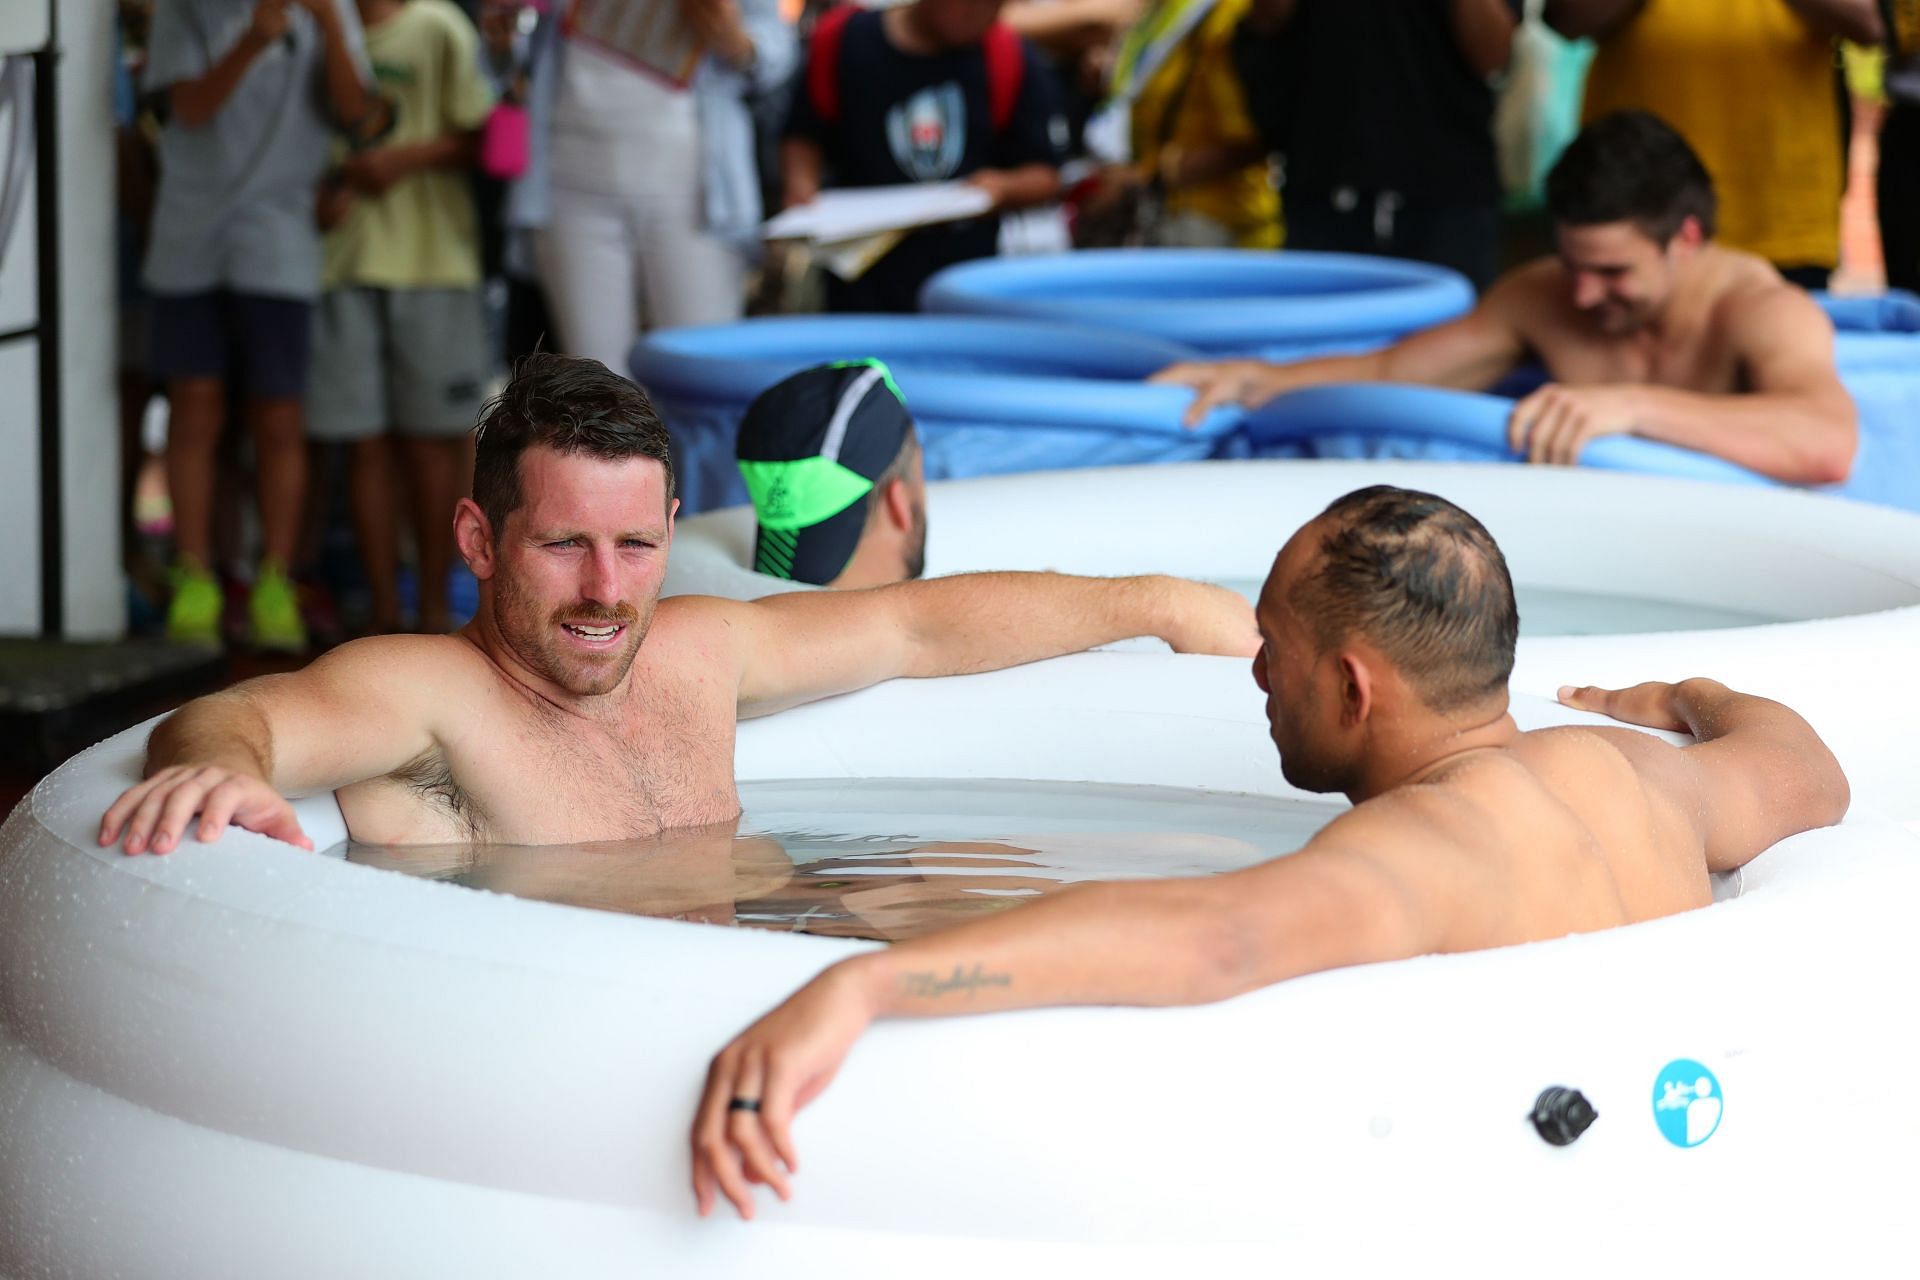 Players recovering in icebaths (Image via Getty)